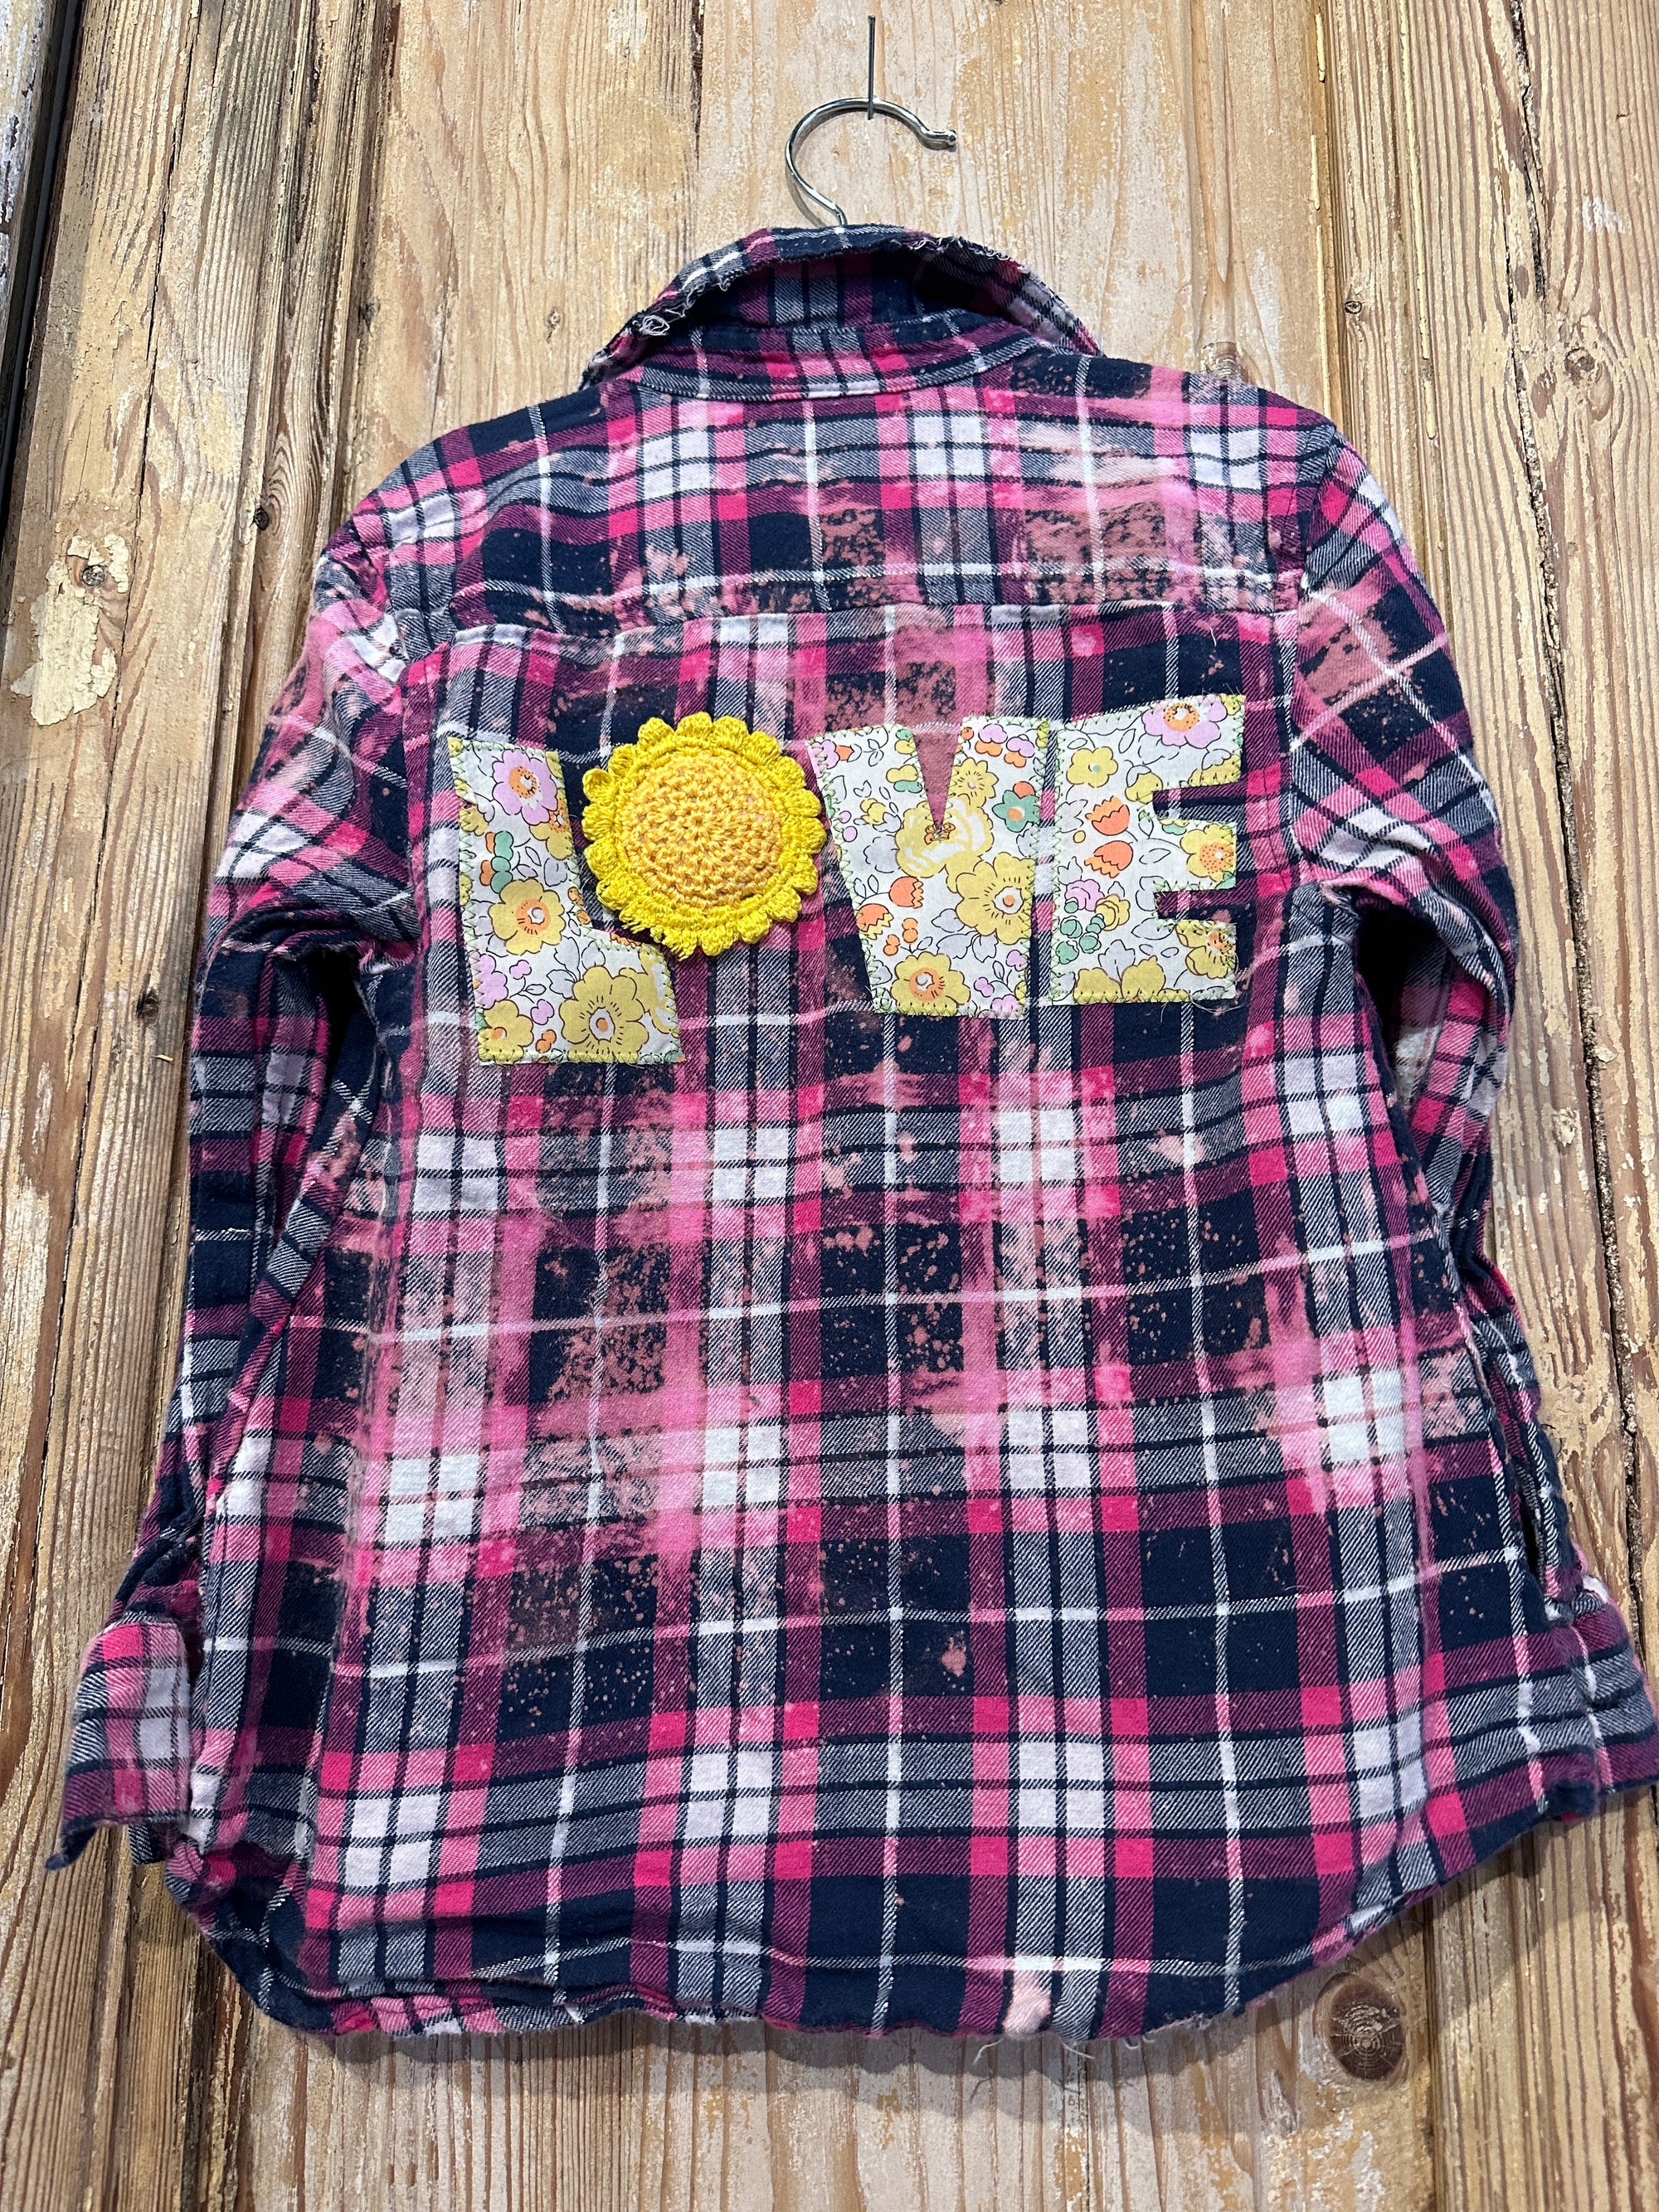 Up Cycled Kids 4T